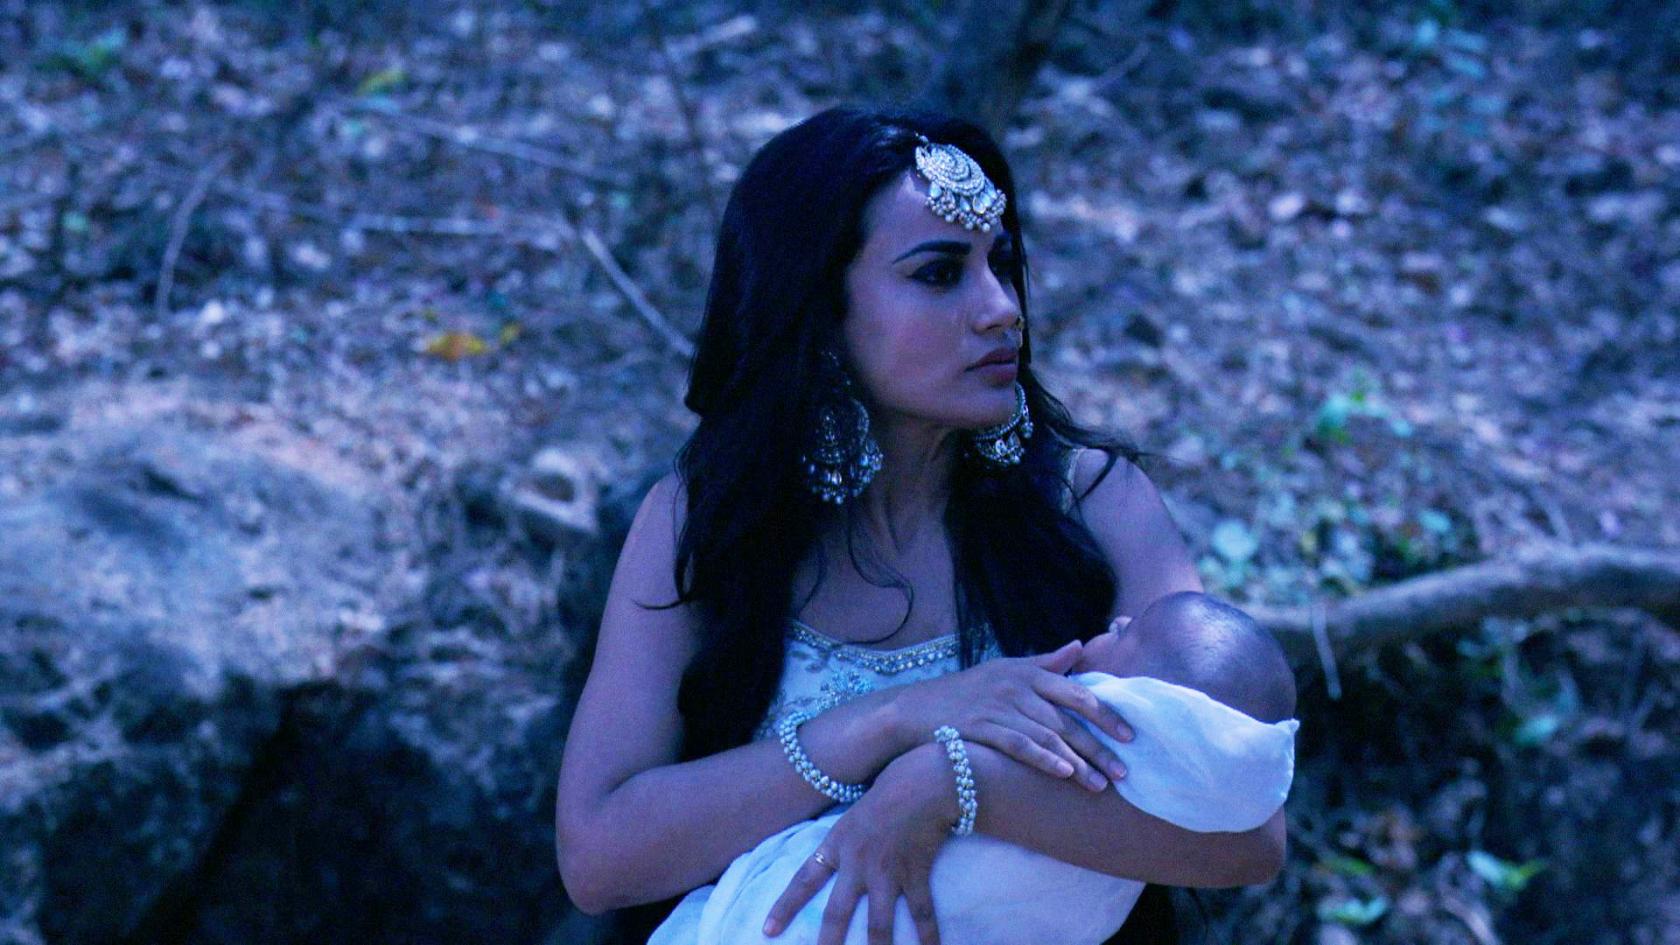 Watch Naagin Season 3 Full Episode 88 06 Apr 2019 Online For Free On Jiocinema Com Follows the lives of three sisters who, after the tragic death of their mother, discover they are powerful witches. naagin bela s mission protect vish s child